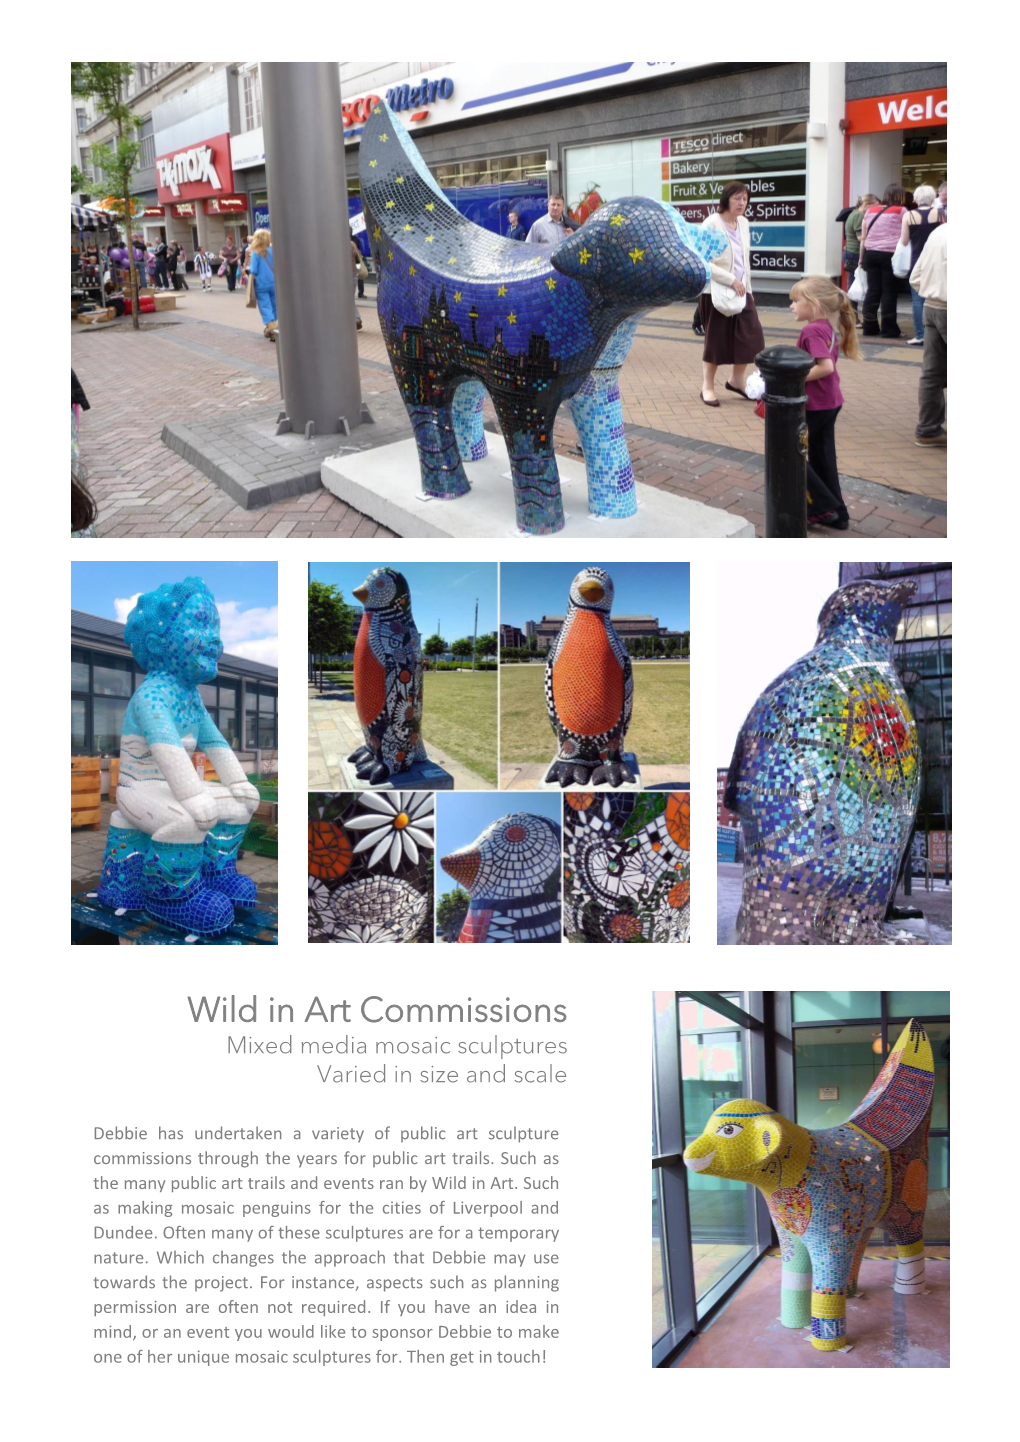 Wild in Art Commissions Mixed Media Mosaic Sculptures Varied in Size and Scale